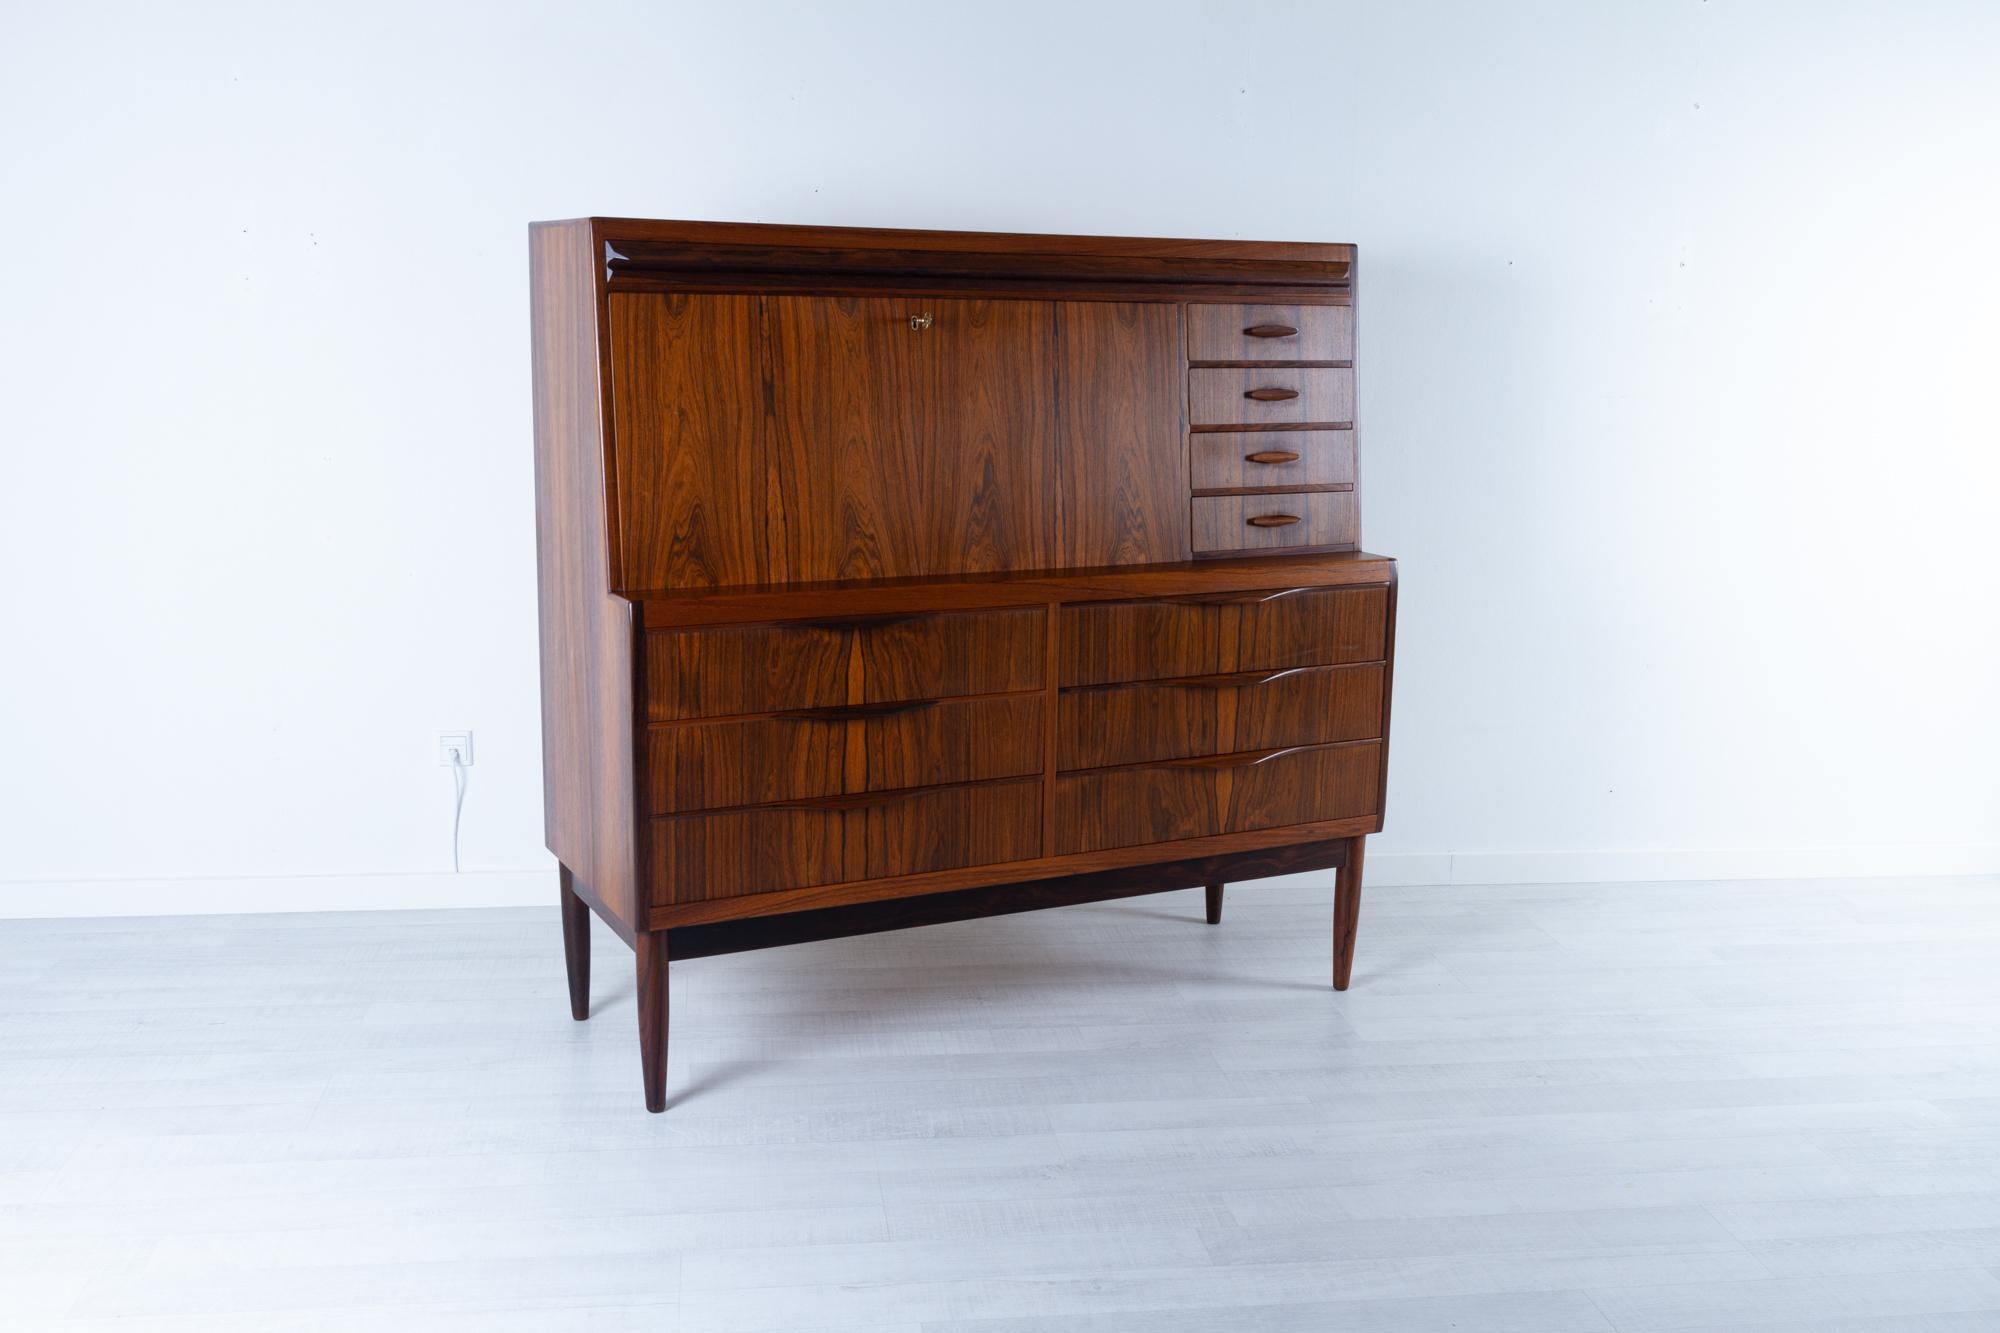 Vintage Danish Rosewood Secretaire by Erling Torvits 1960s
Stunning Rosewood bureau designed by Danish architect Erling Torvits for Klim Møbelfabrik Denmark. This is the more rare large model with the additional four drawers next to the